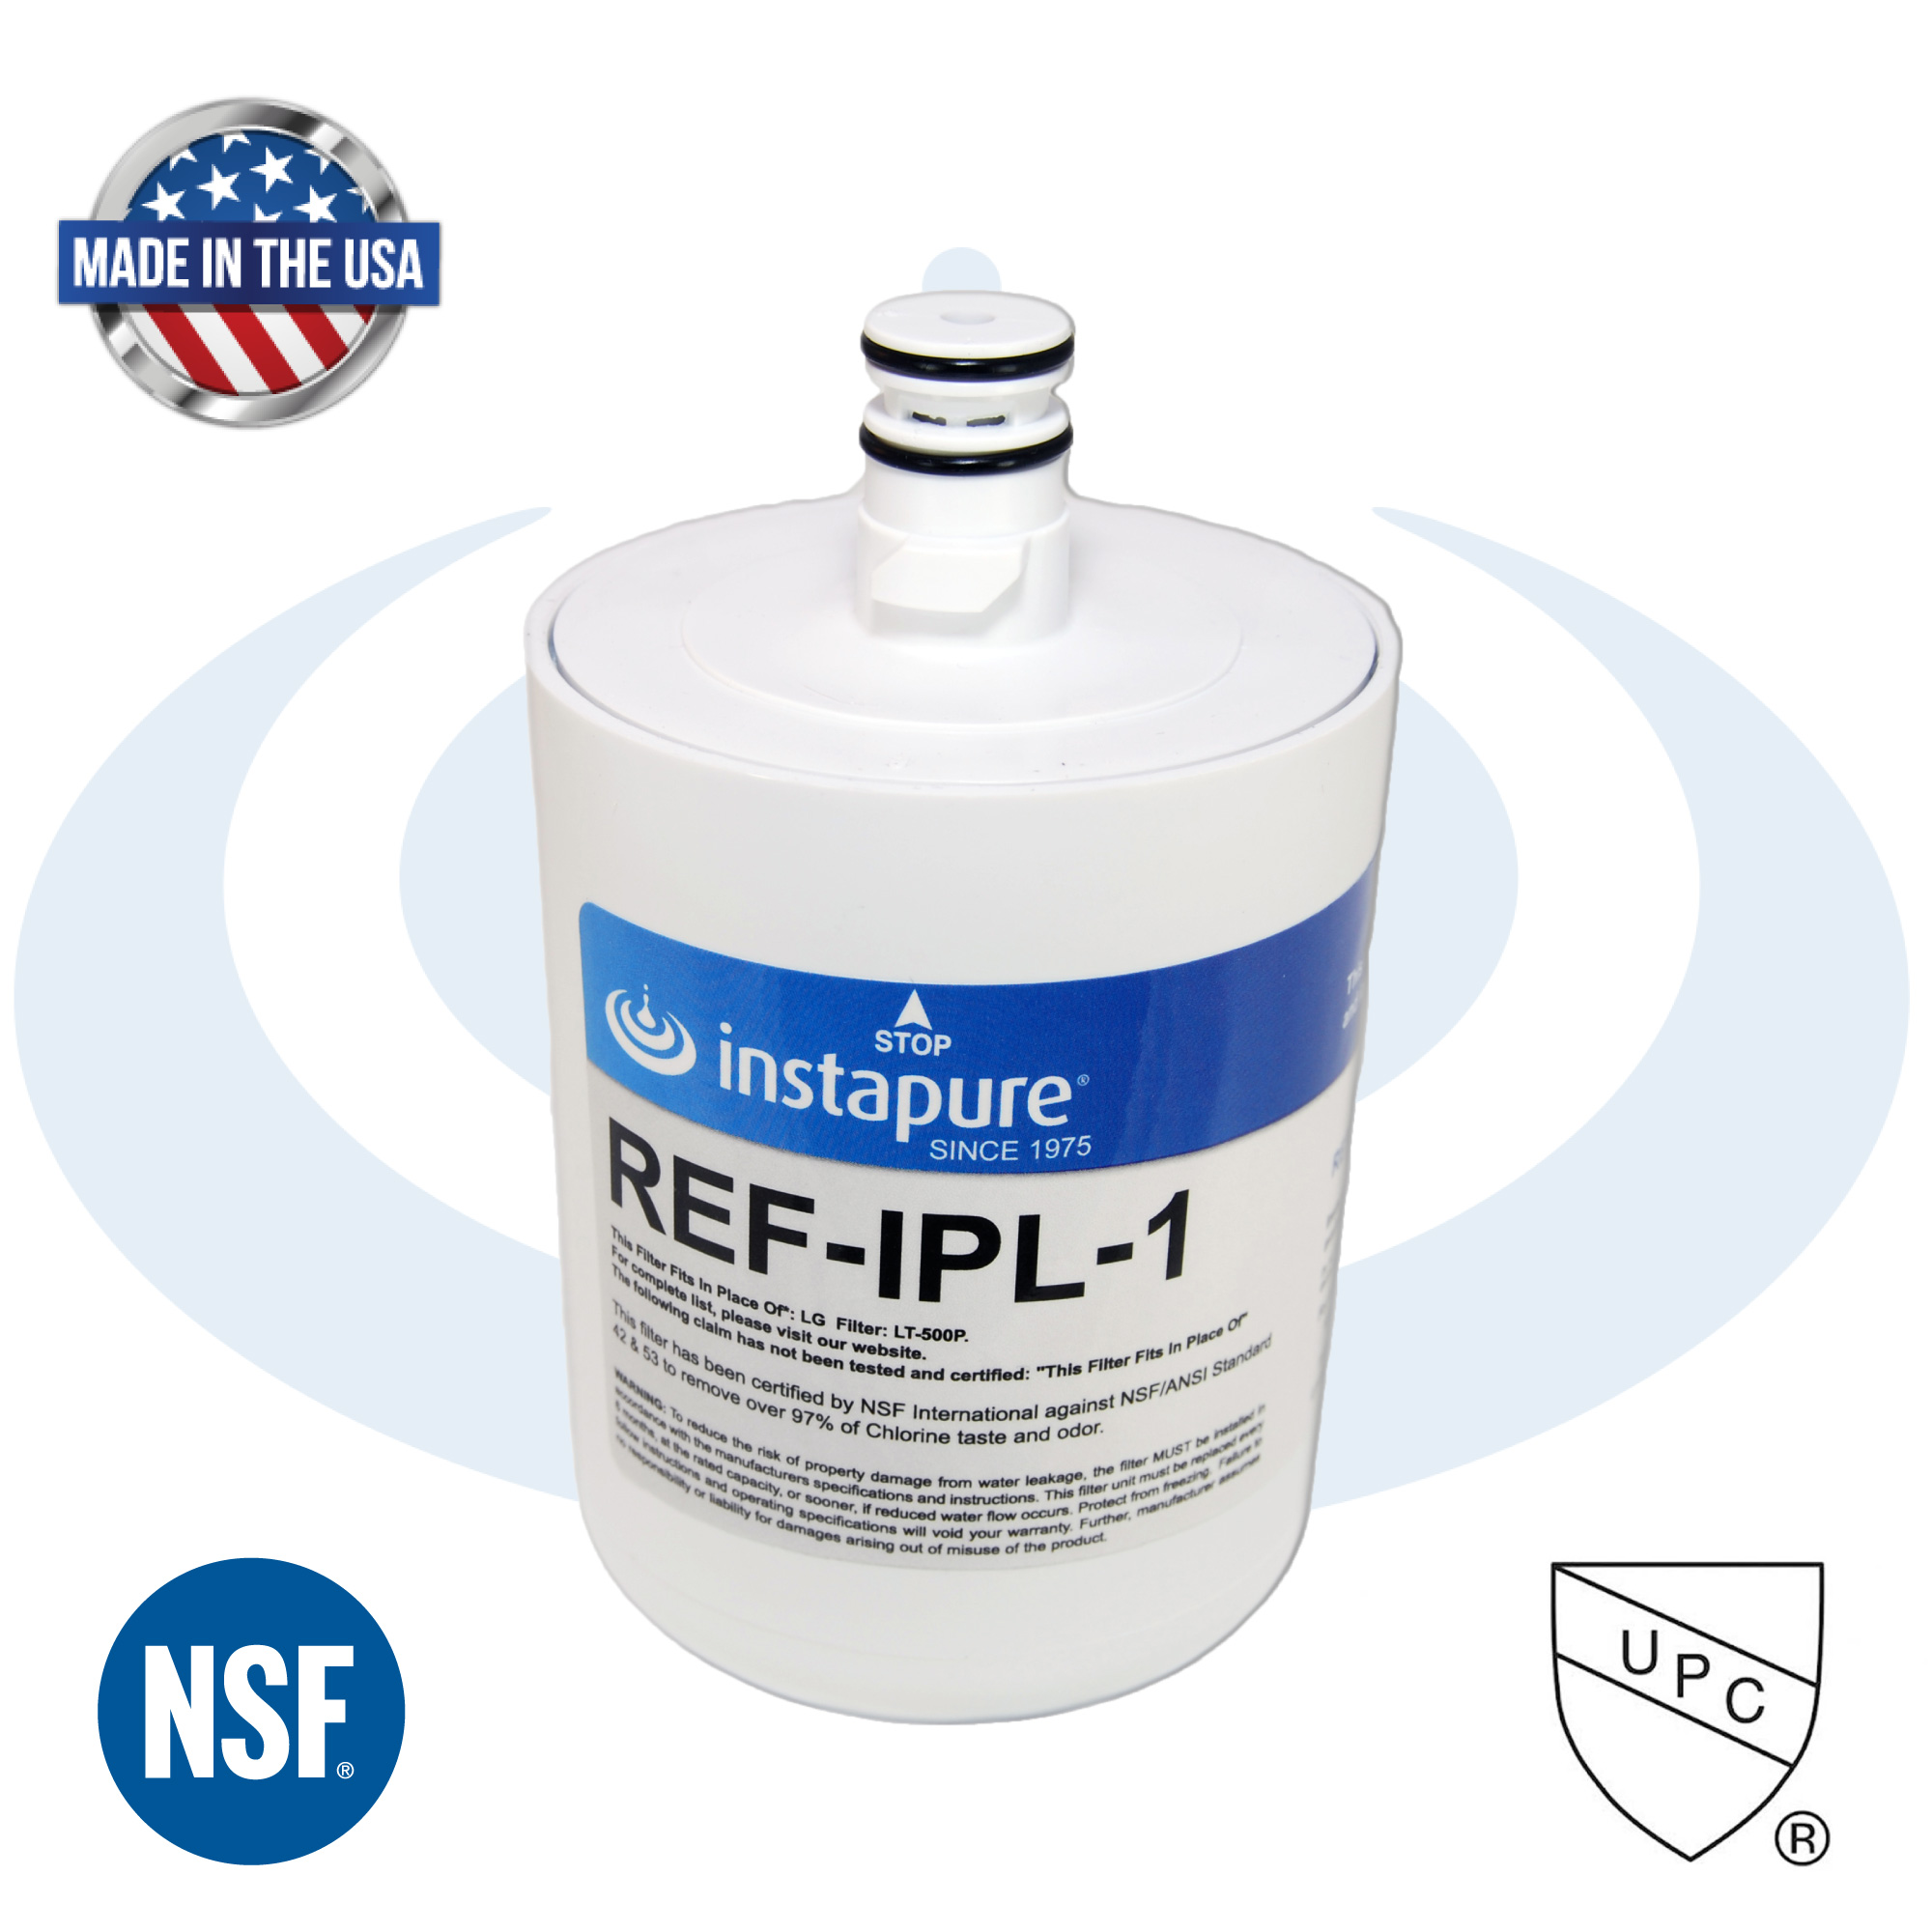 Made in USA LT500P & 46-9890 Compatible Refrigerator Filter by Instapure,  NSF/ANSI P473, 401, 372, 53 & 42 Certified for PFOA/PFOS, Pharmaceuticals,  